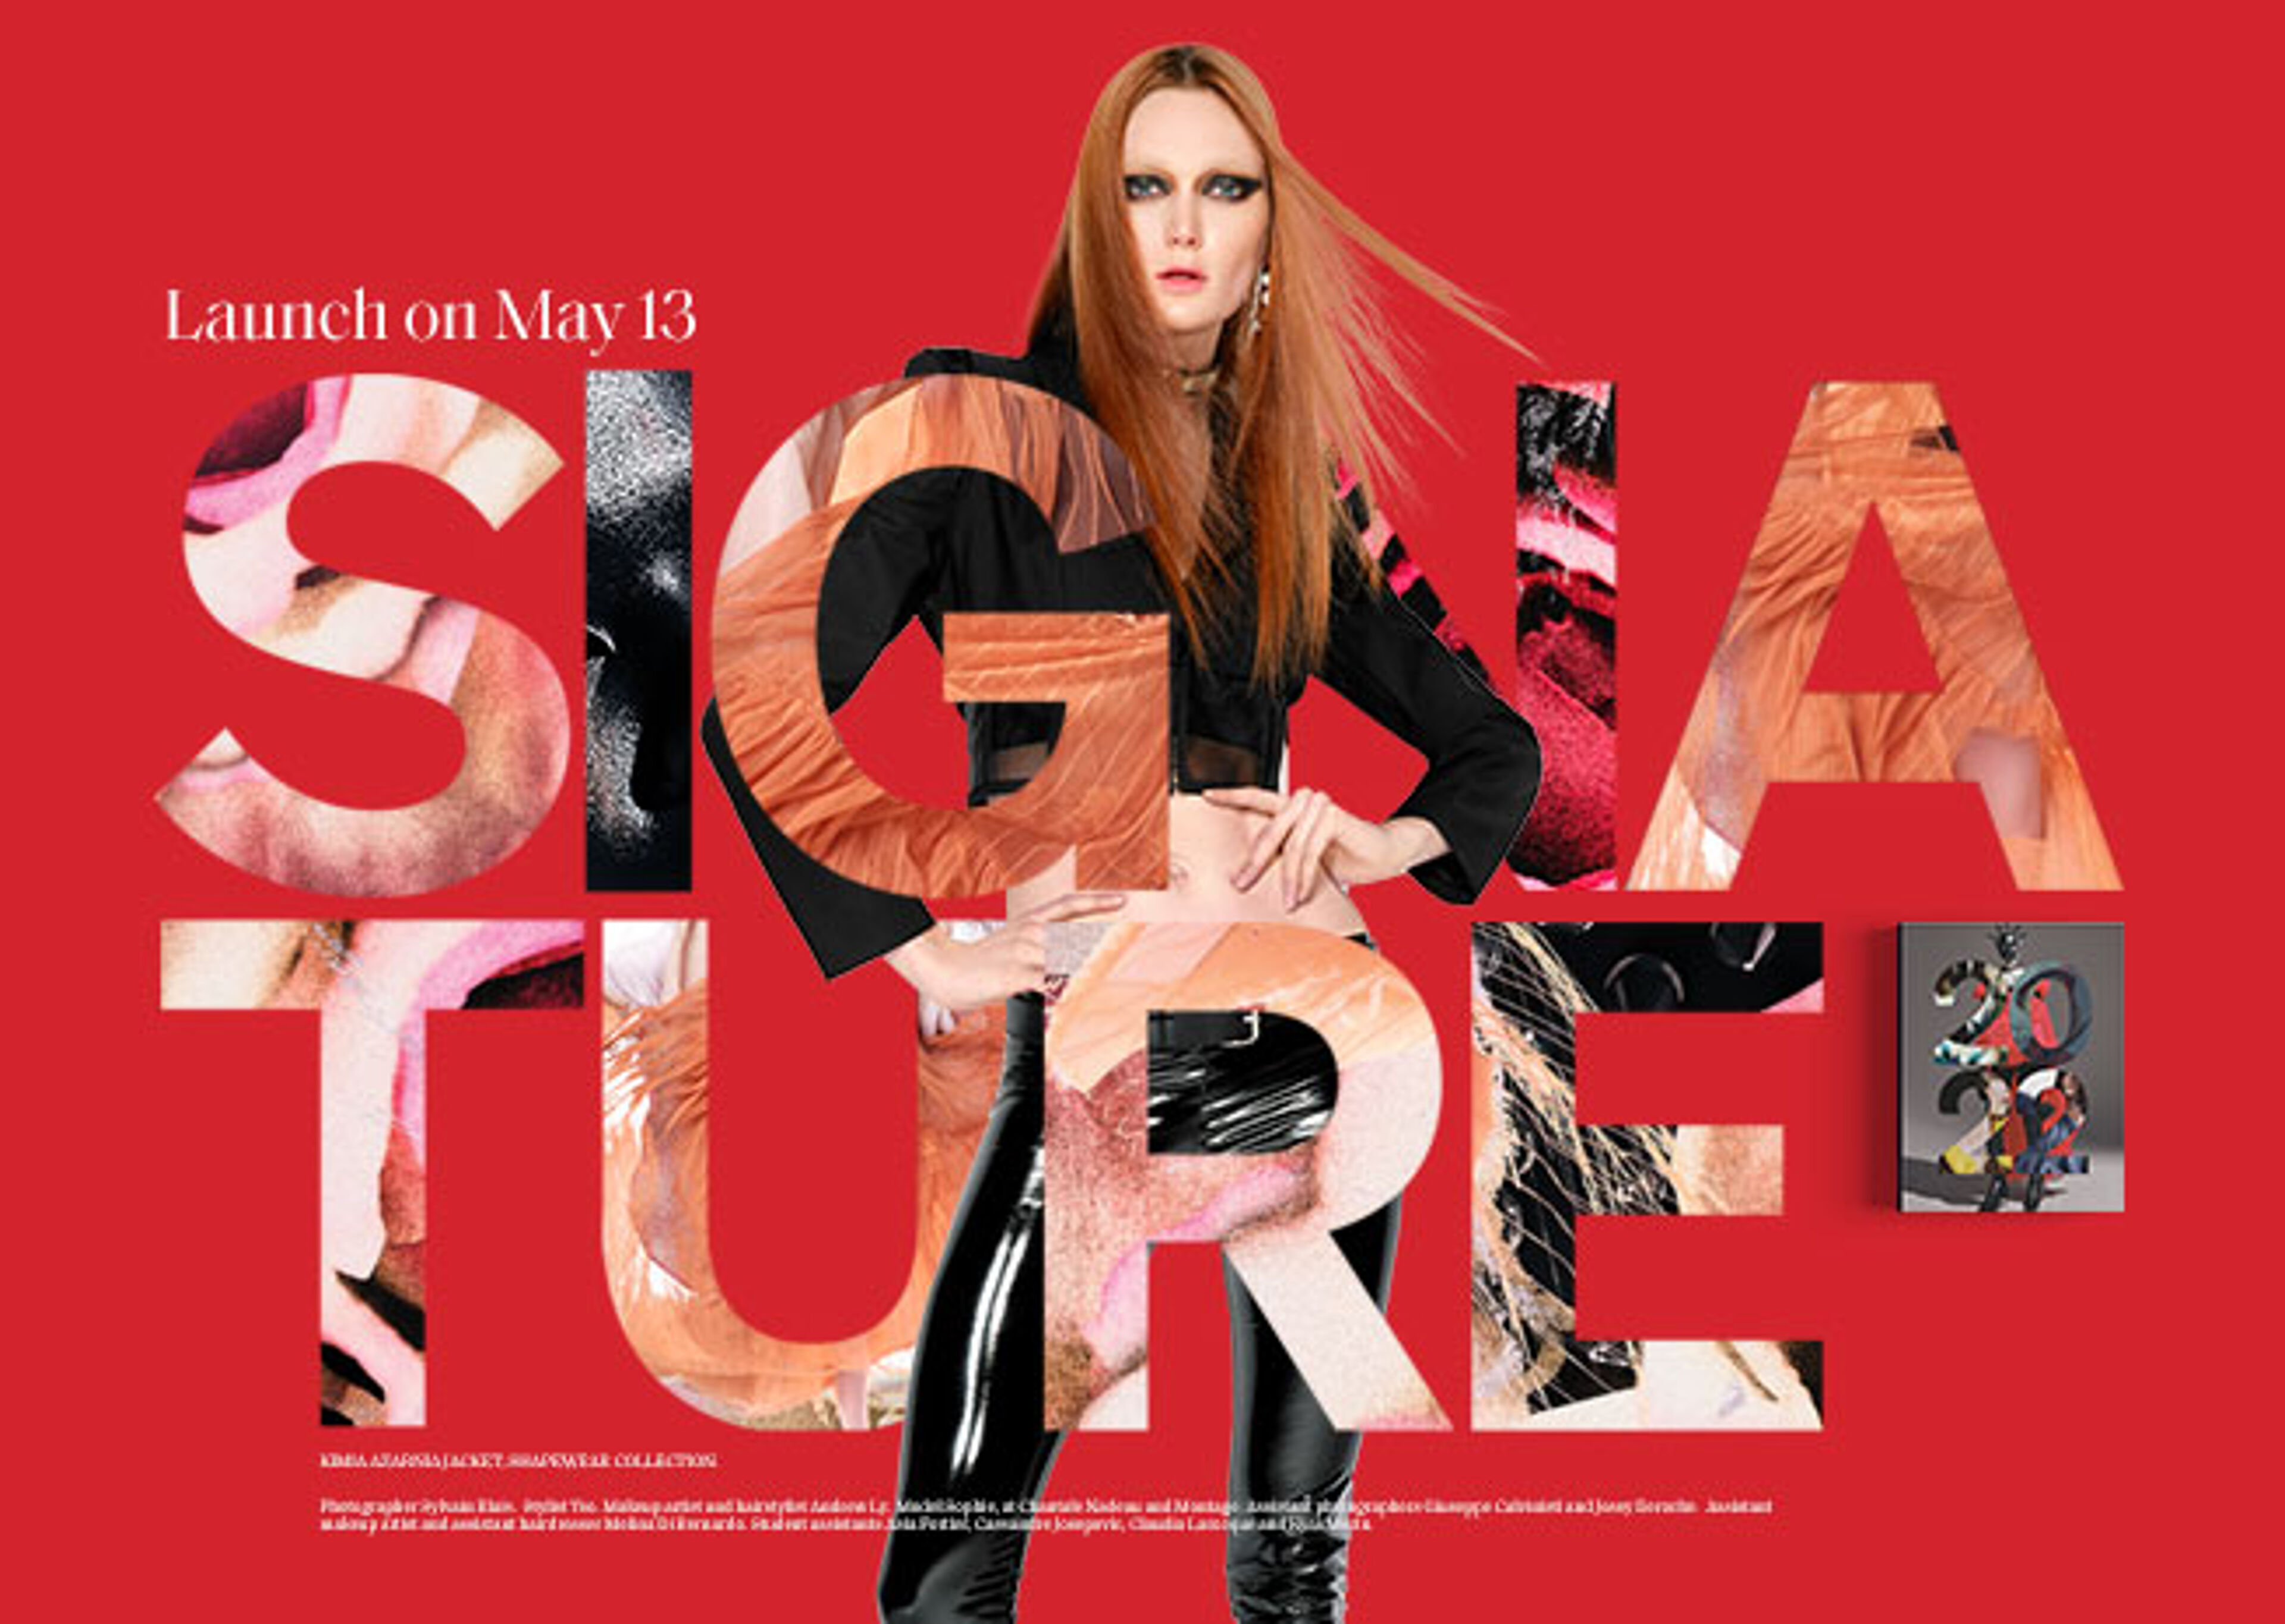 Ad for the launch of the 'Signature' fashion collection on May 13, featuring a bold model